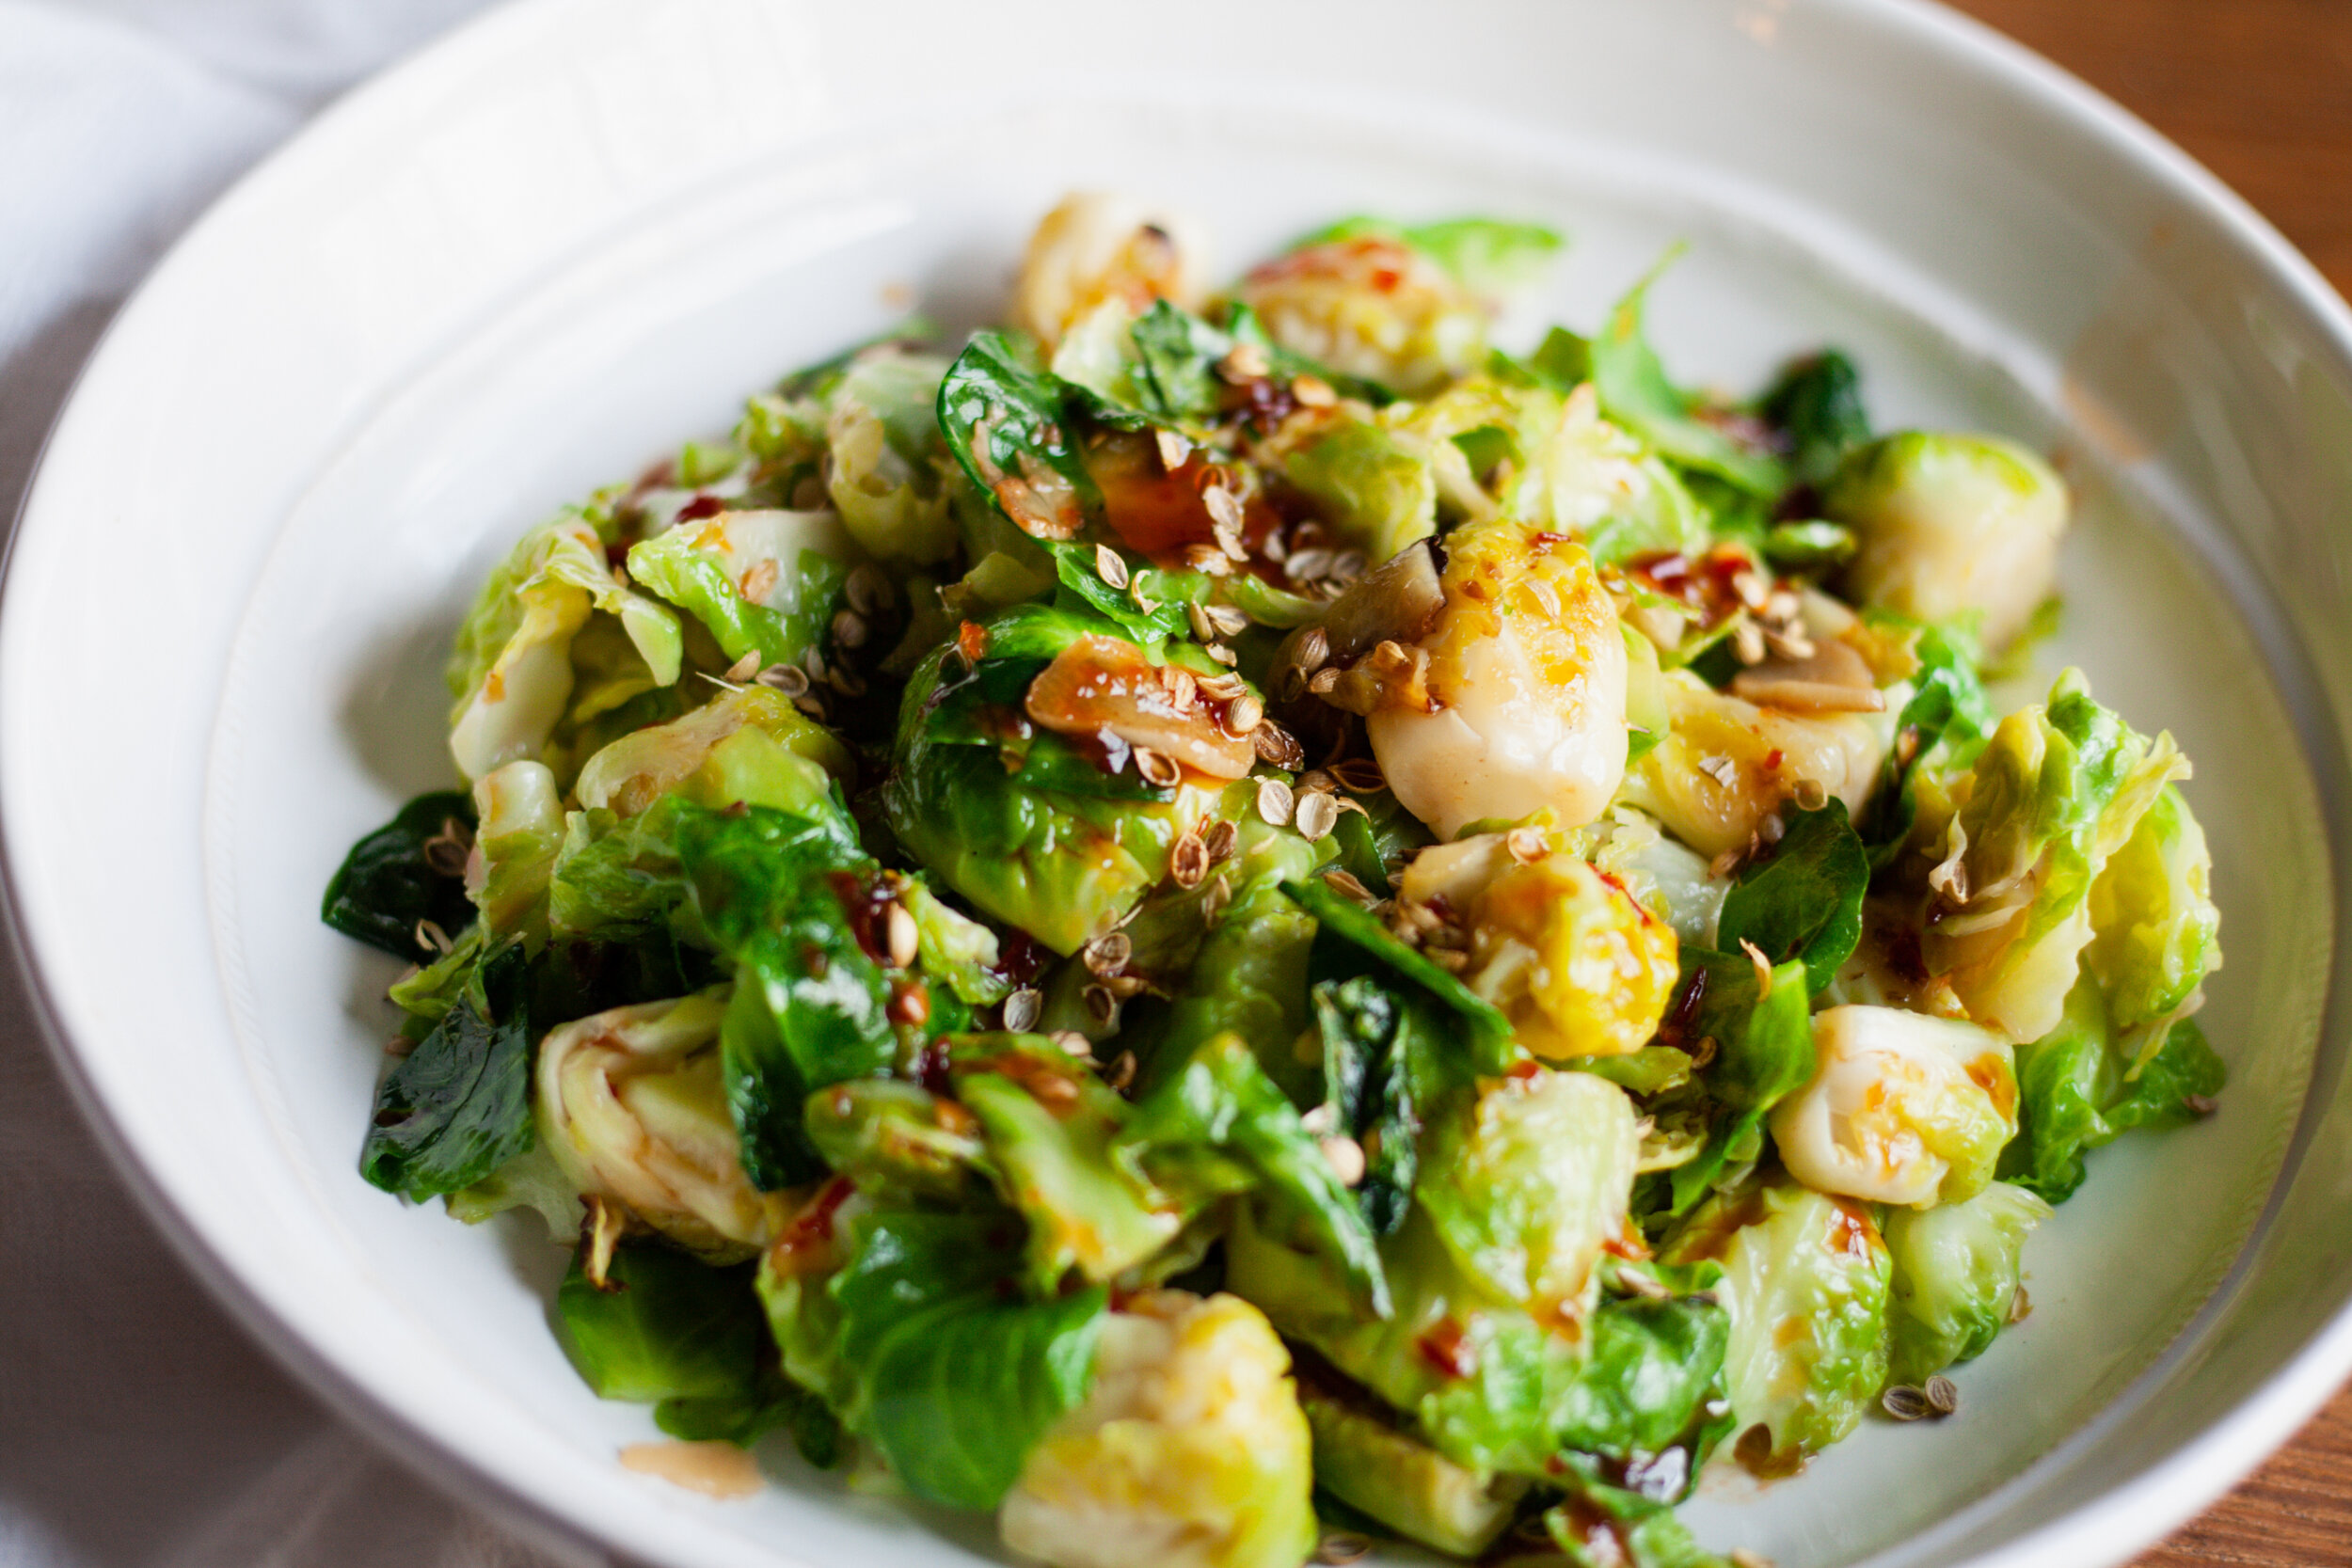 Sauteed Brussels Sprouts with Coriander and Spicy Chili Sauce-1748.jpg